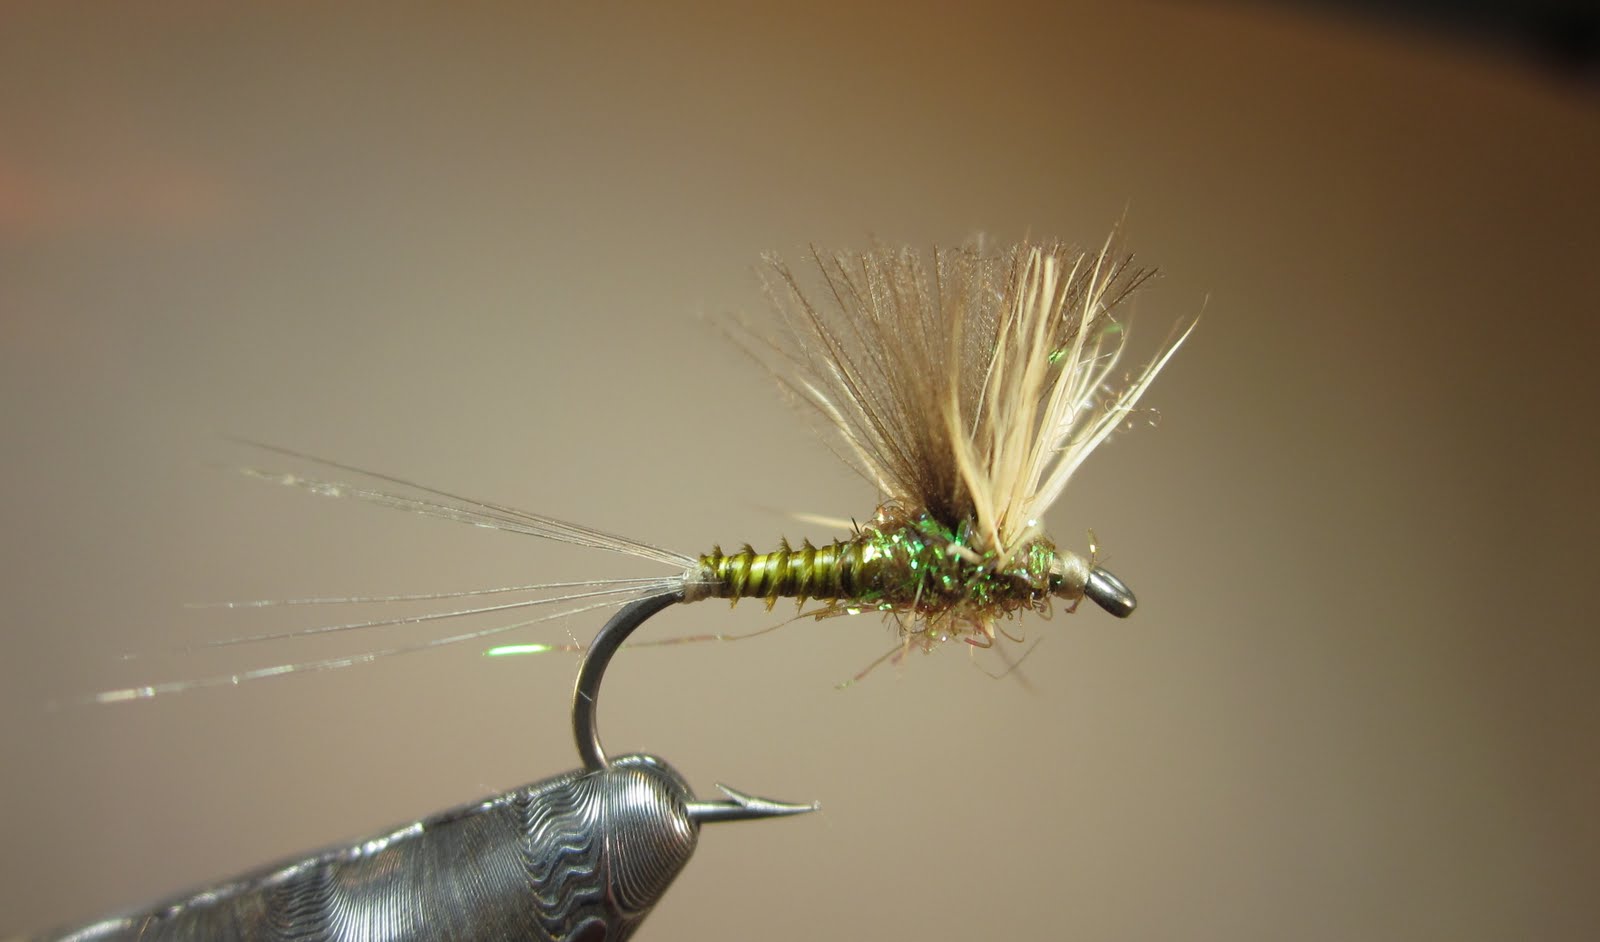 Fly Fishing and Fly Tying: New photo of a Soft Hackle and Biot Body ...